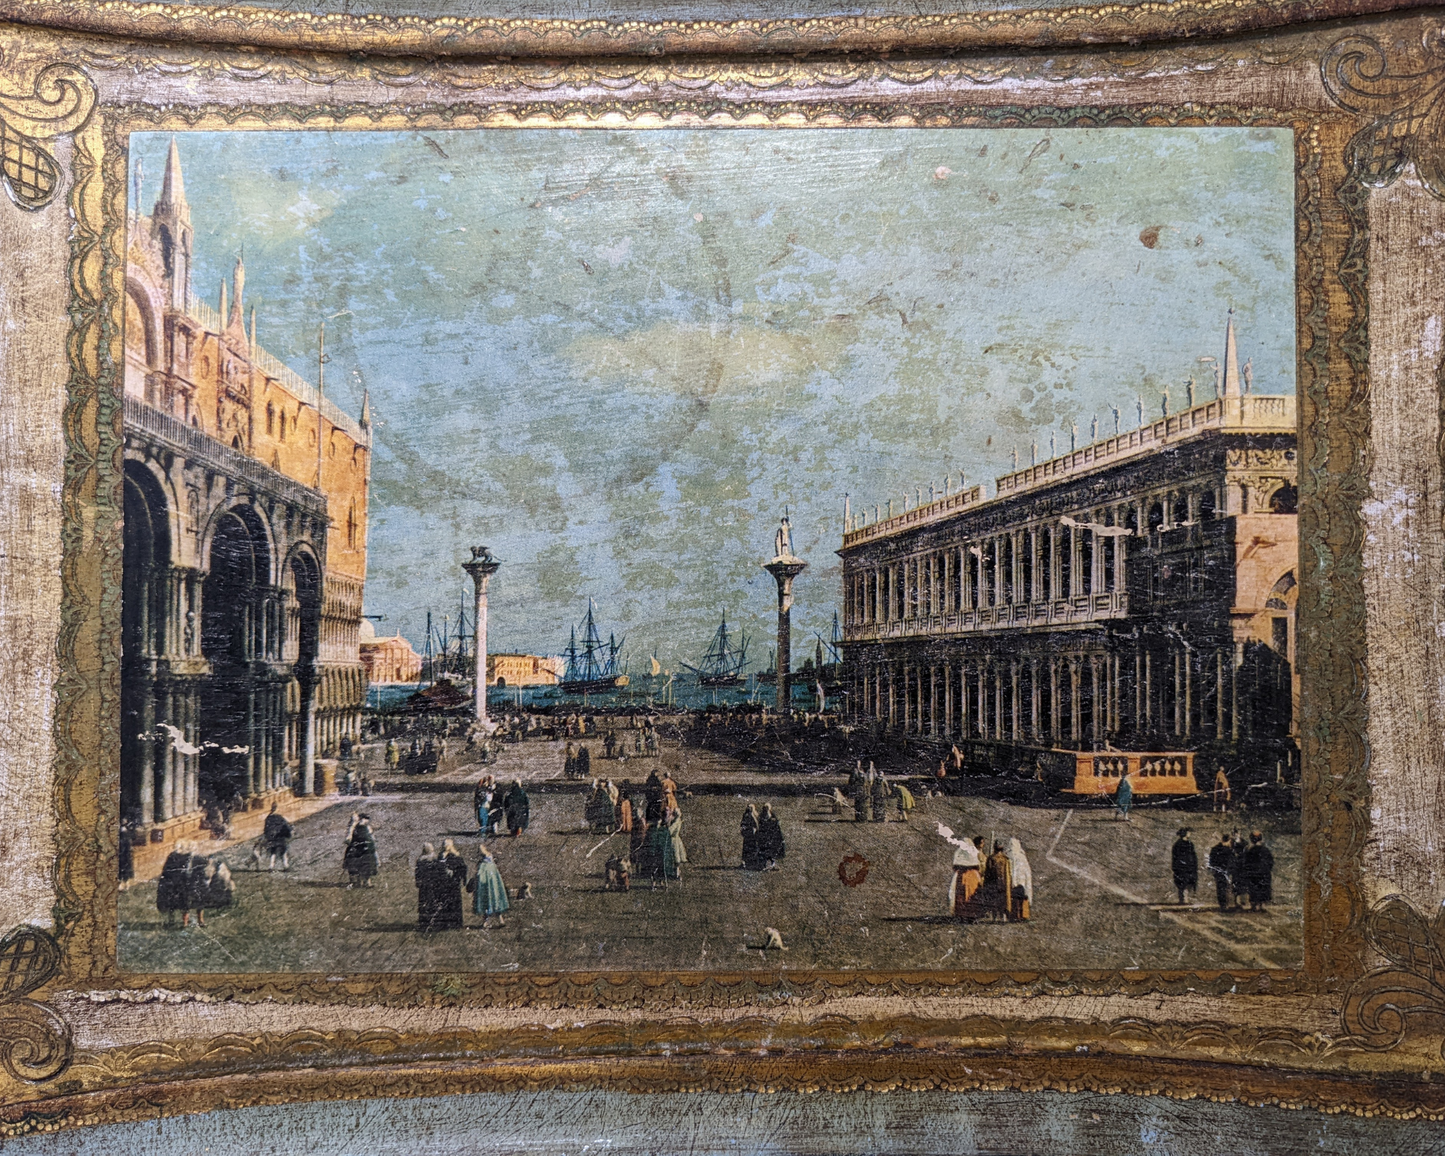 Antique Late 18th Century View of St. Mark Square Wooden, Decorative Florentine Tray From Rome Italy